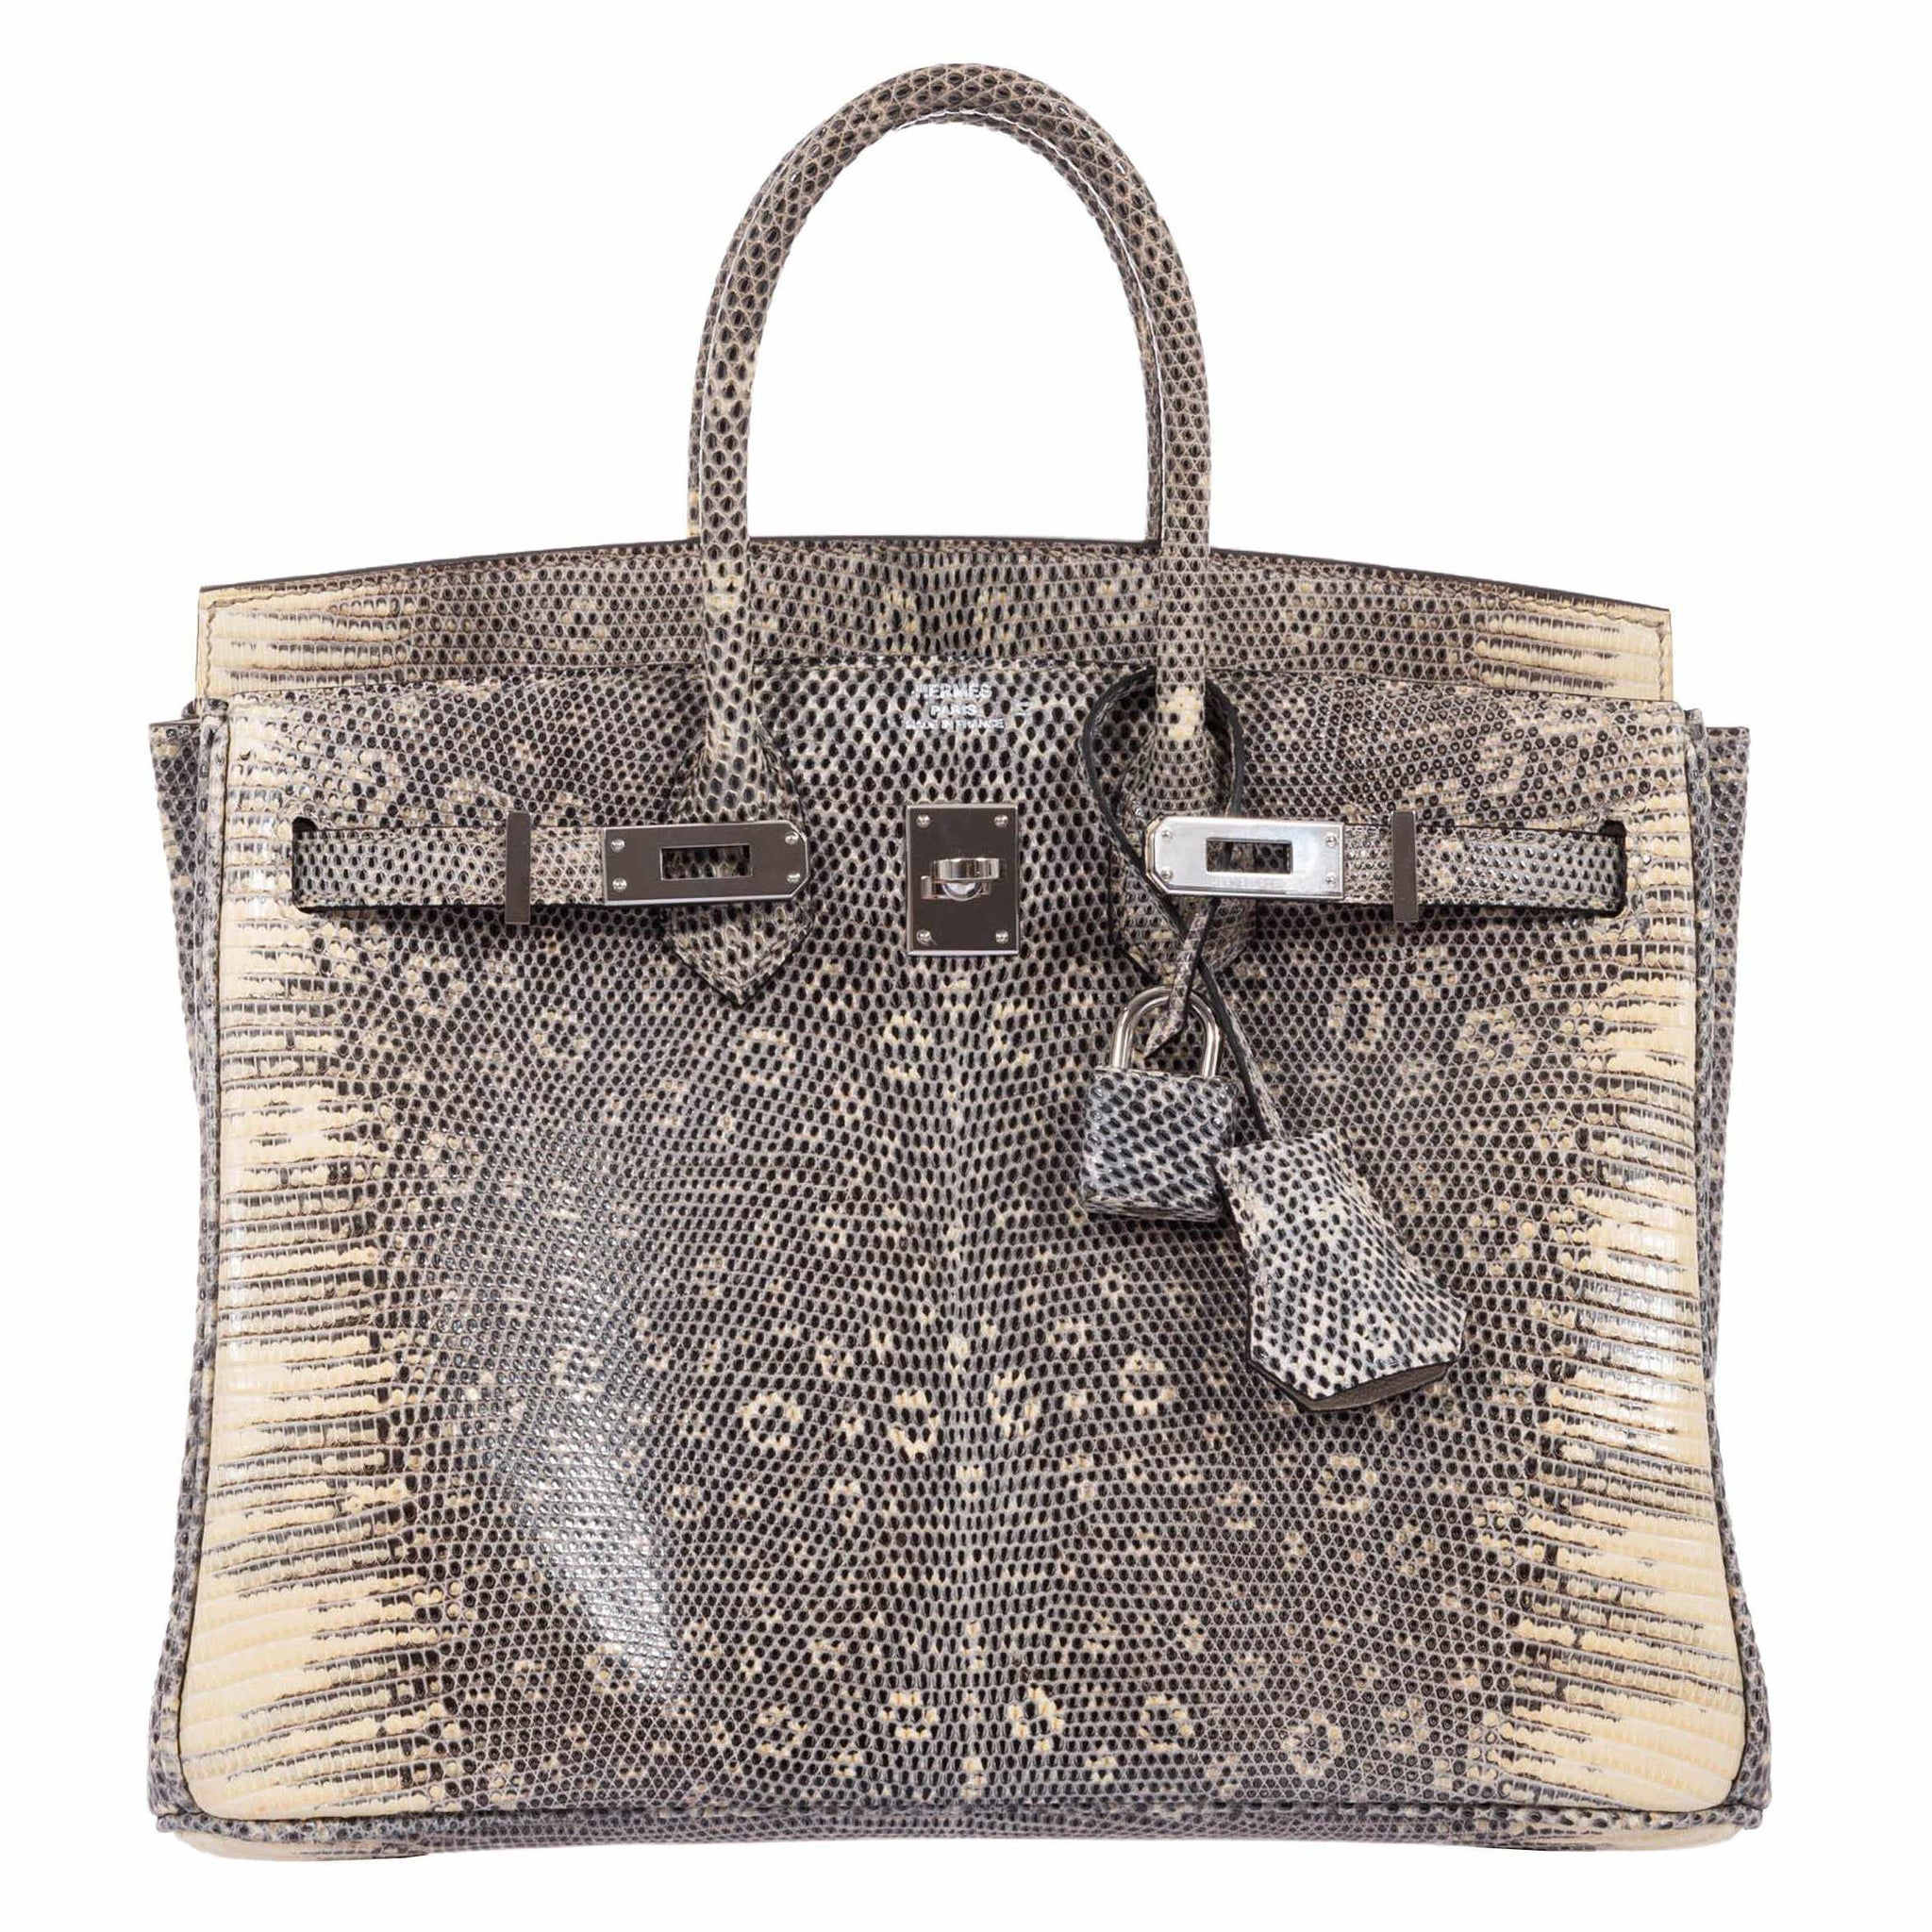 Check out the rare Shadow Birkin 25 in one of the most demanded